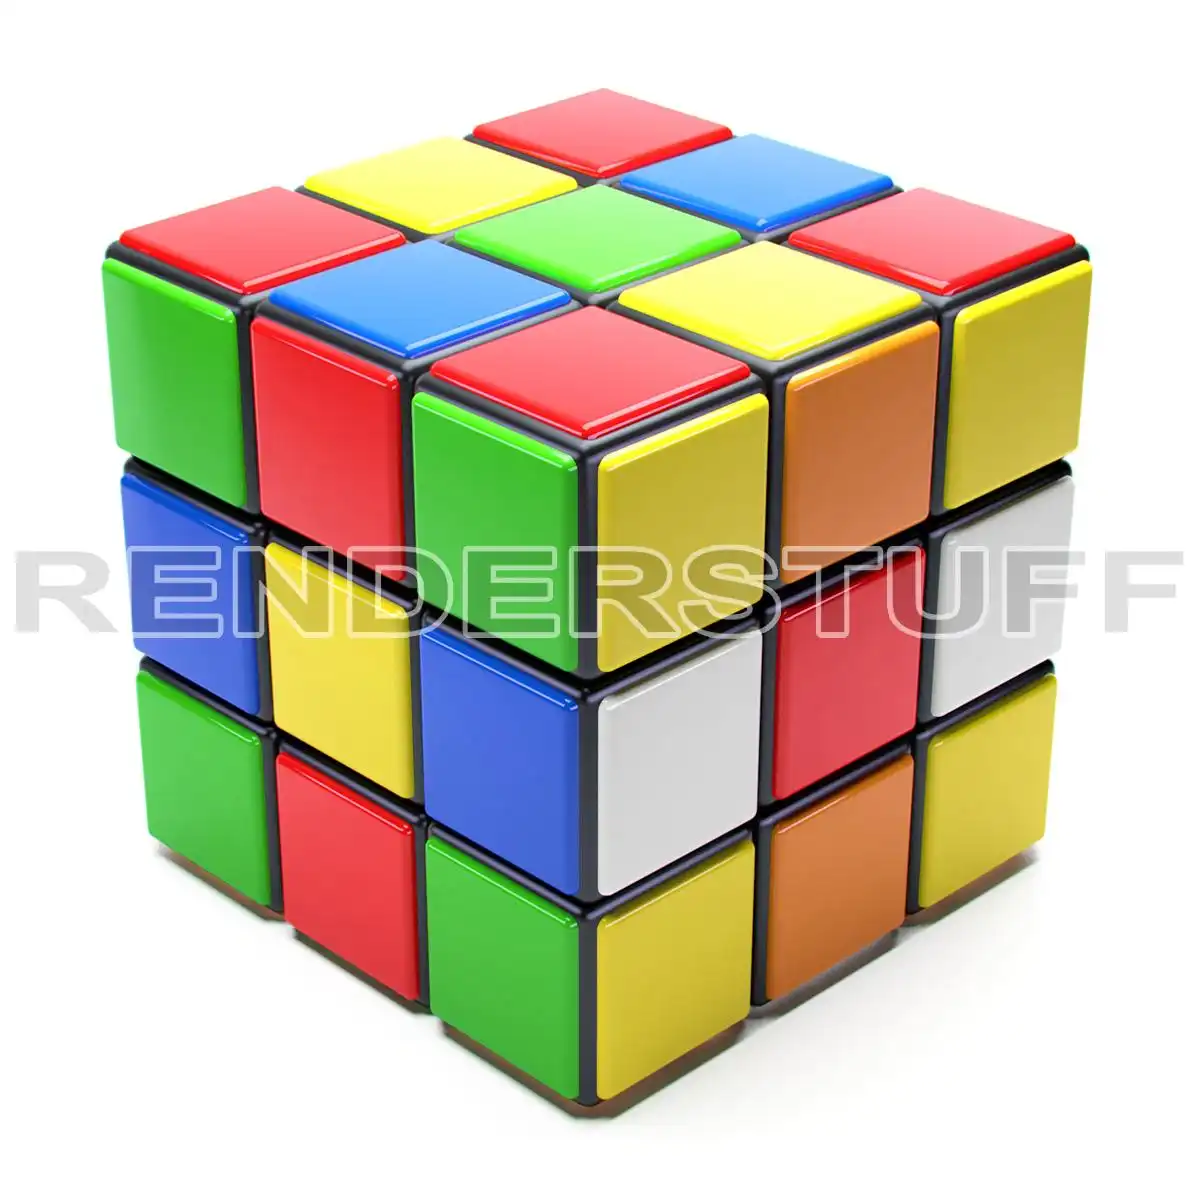 Realistic free 3D model of Speed Cube toy 3D puzzle.